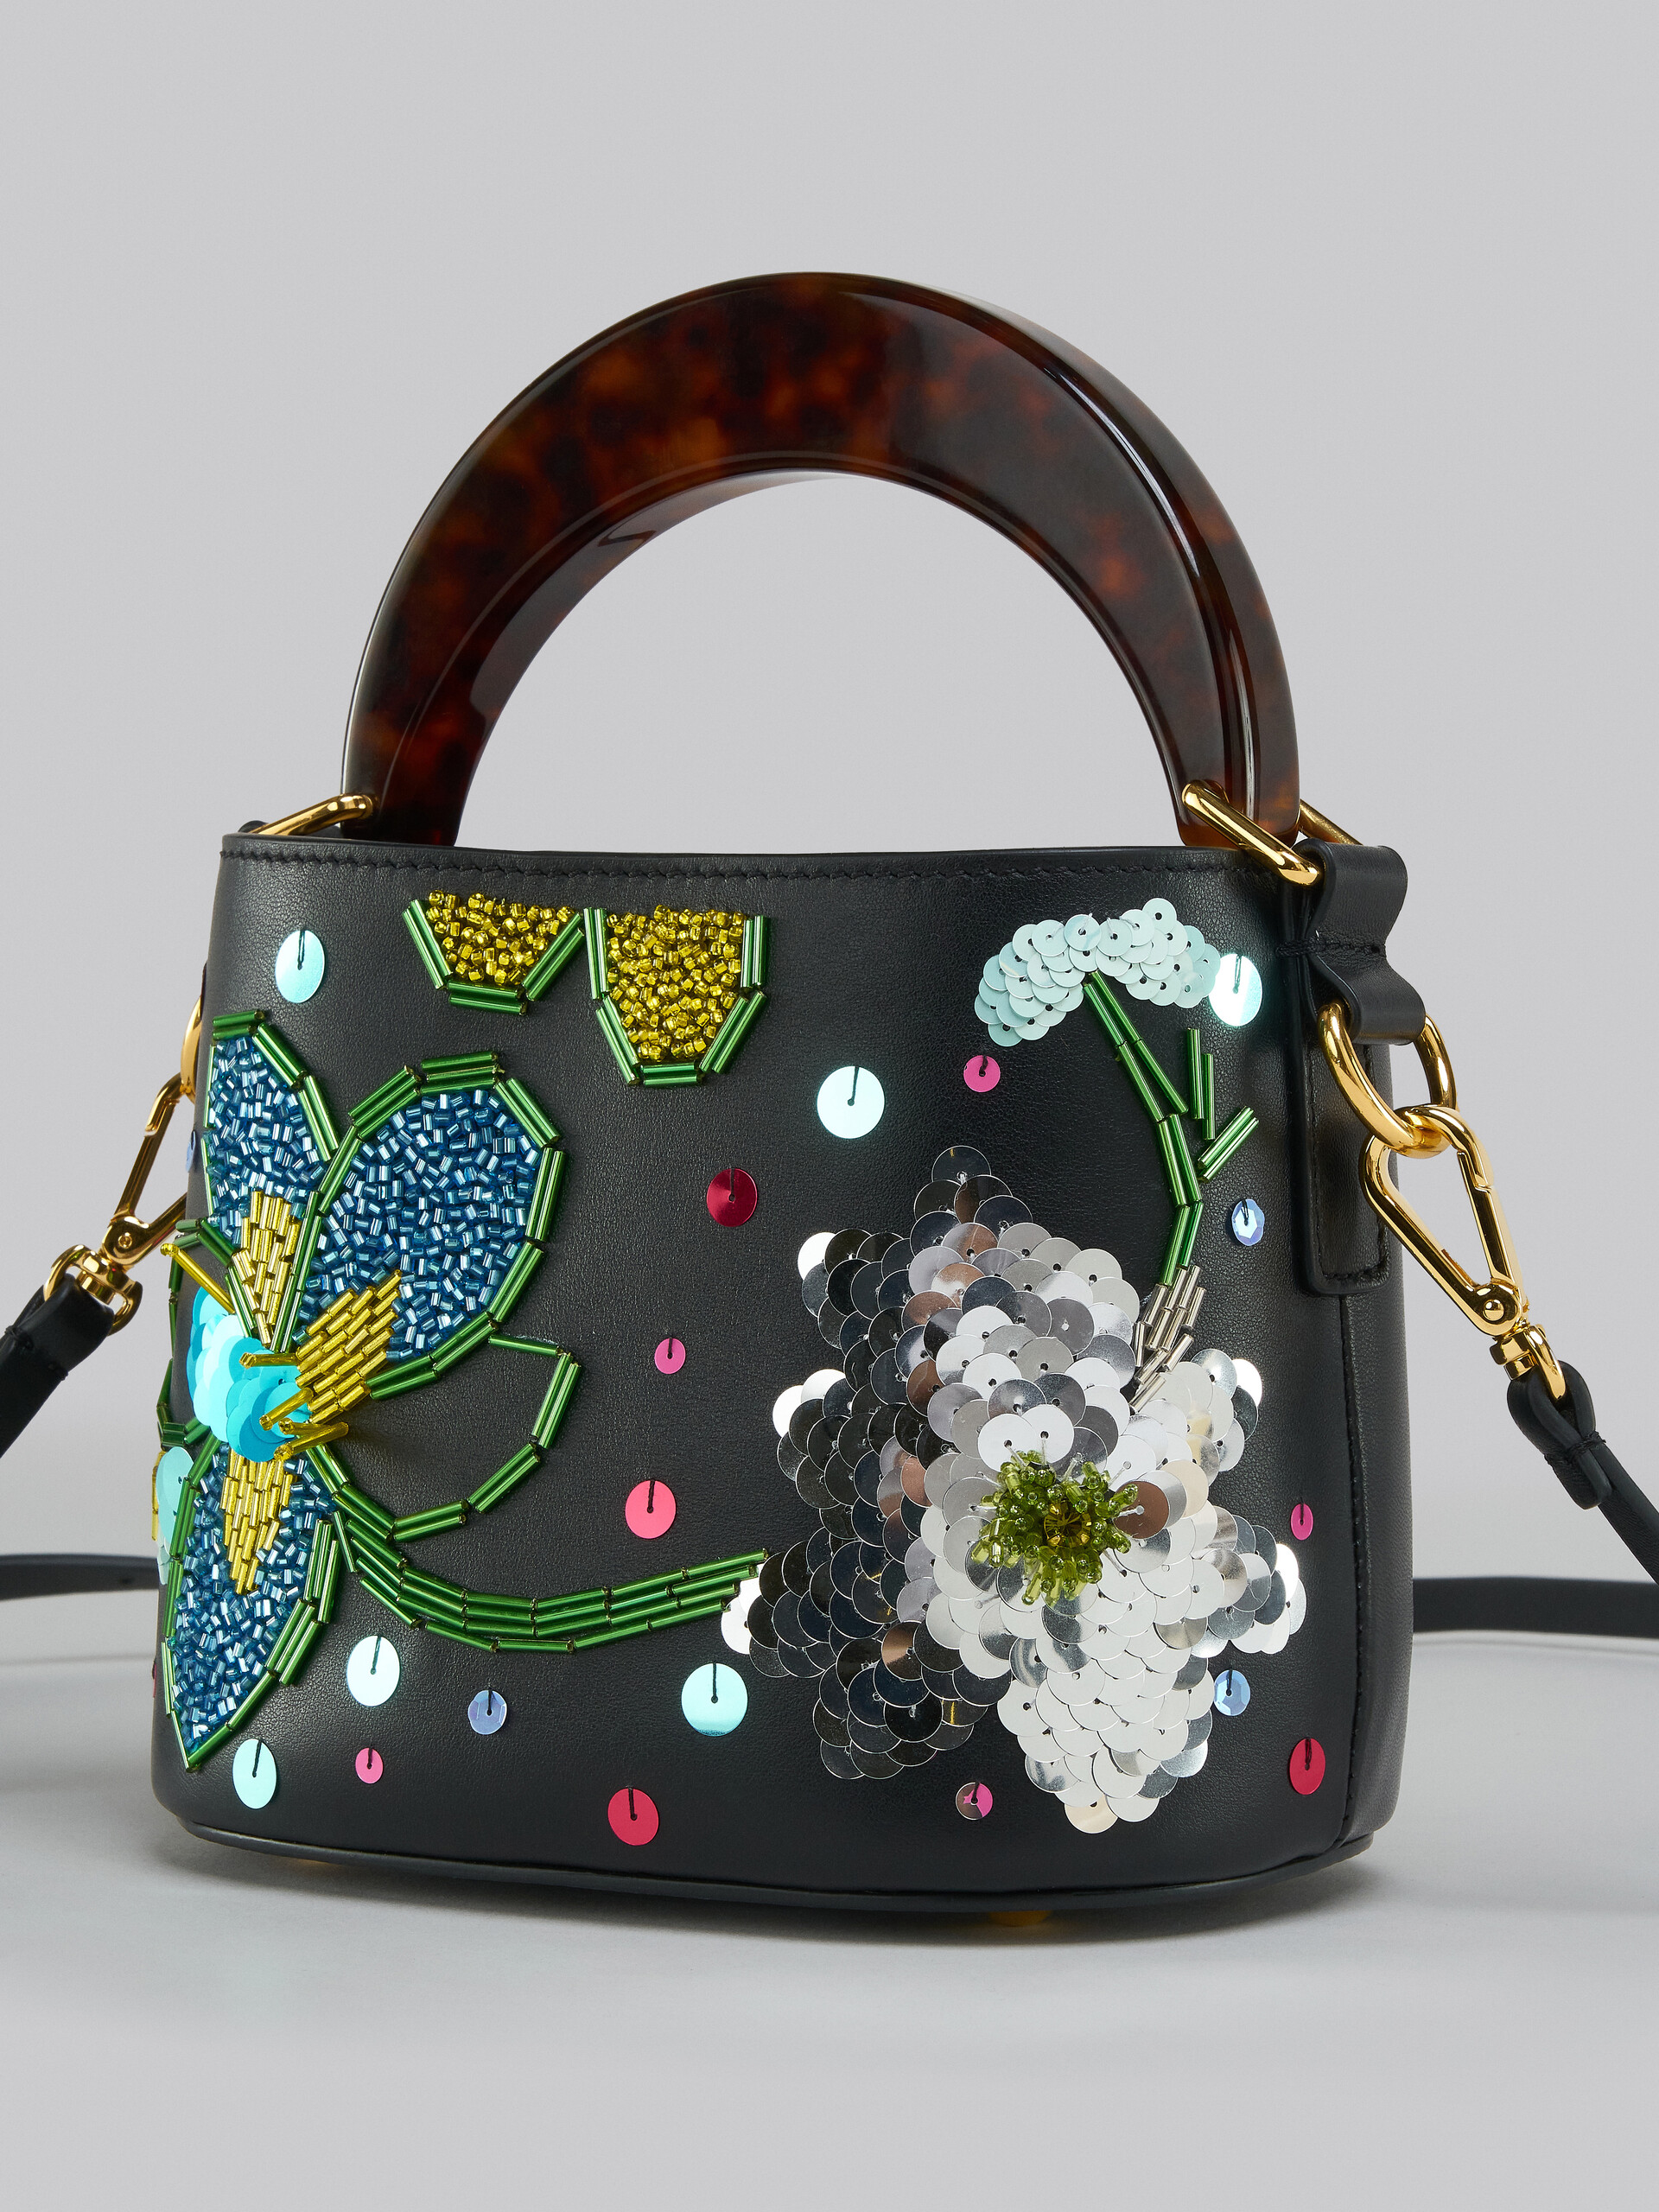 Venice Mini Bucket in embroidered black leather - Shoulder Bags - Image 4